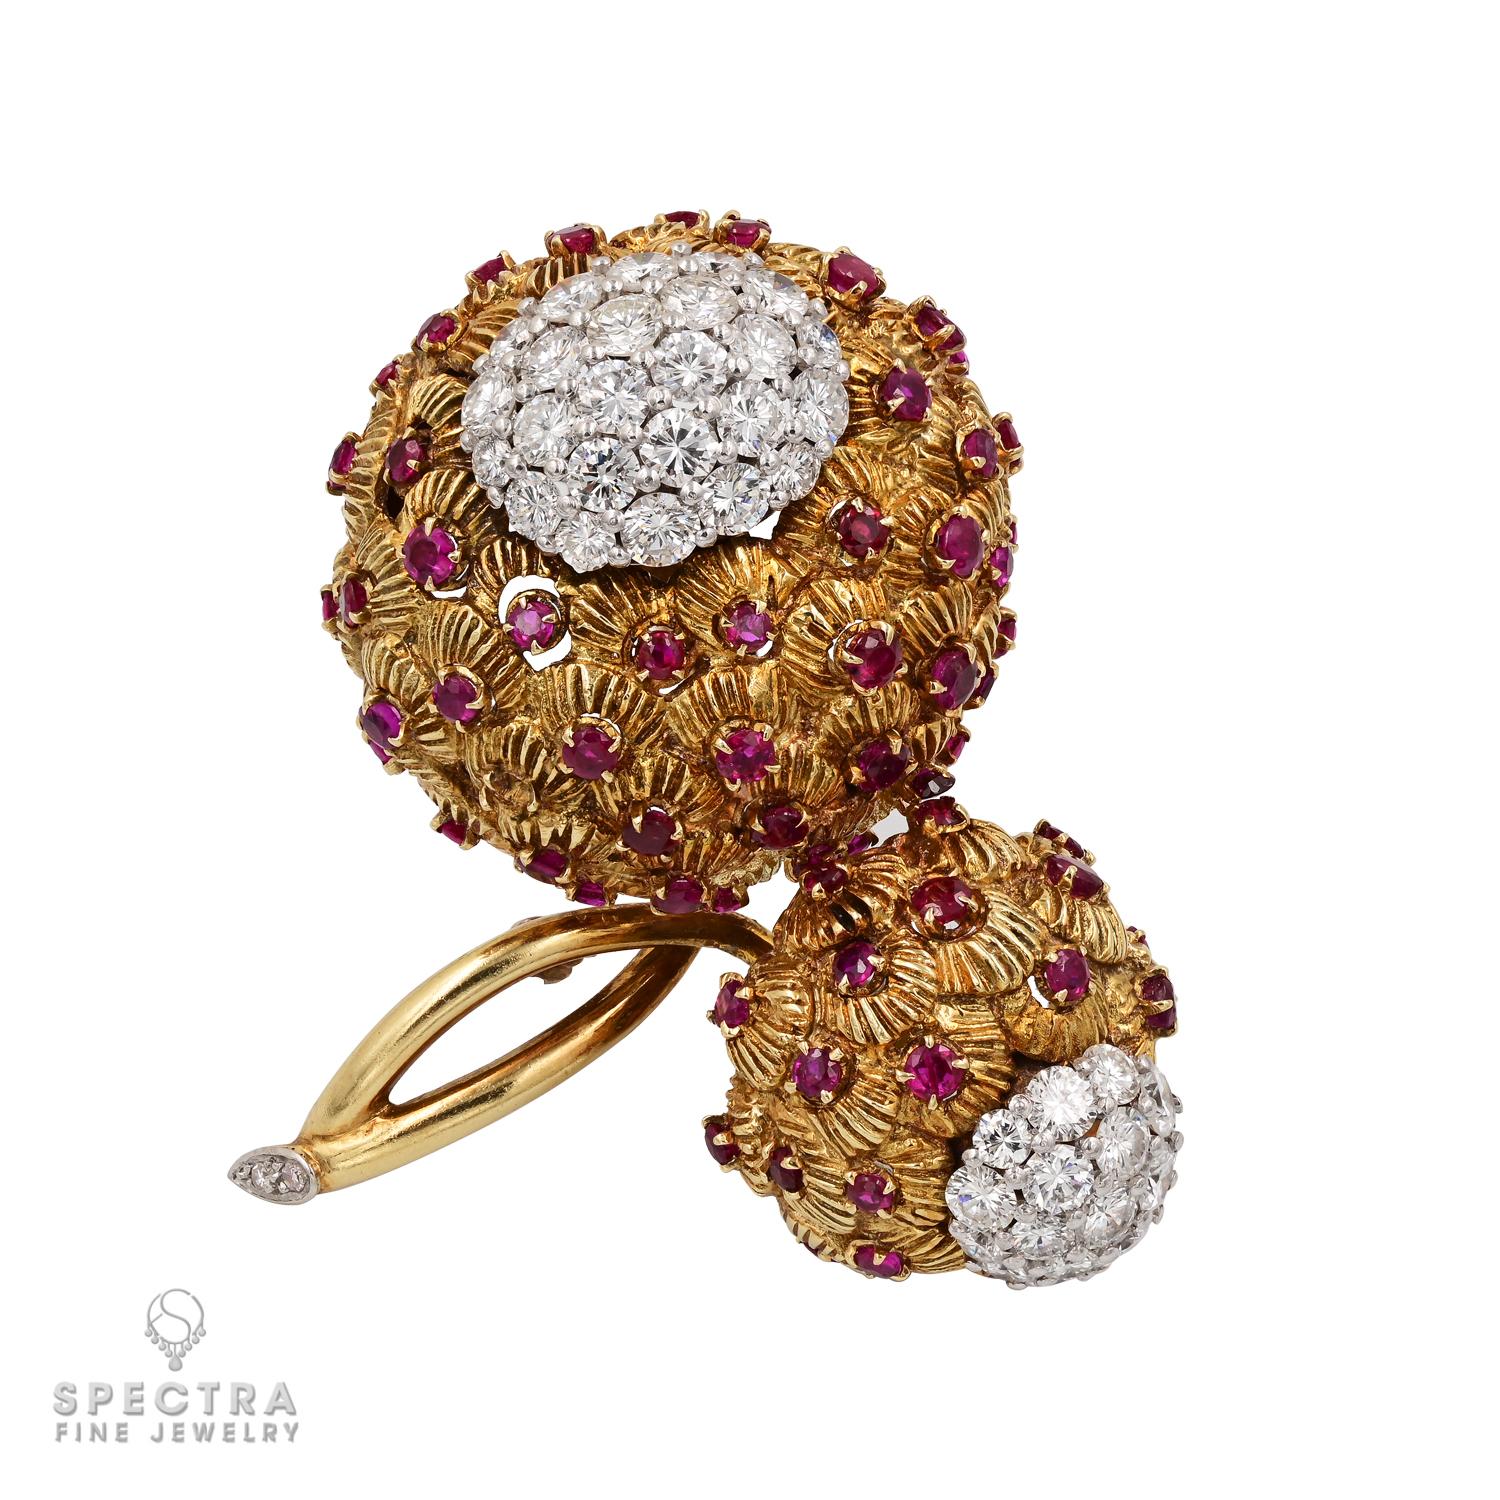 A visually intriguing mix of design details comes together in this Contemporary Diamond and Ruby Demi Parure Suite, comprised of three thematically related pieces - a pair of ear clips, a brooch, and a ring, each of bombe design. Although made in